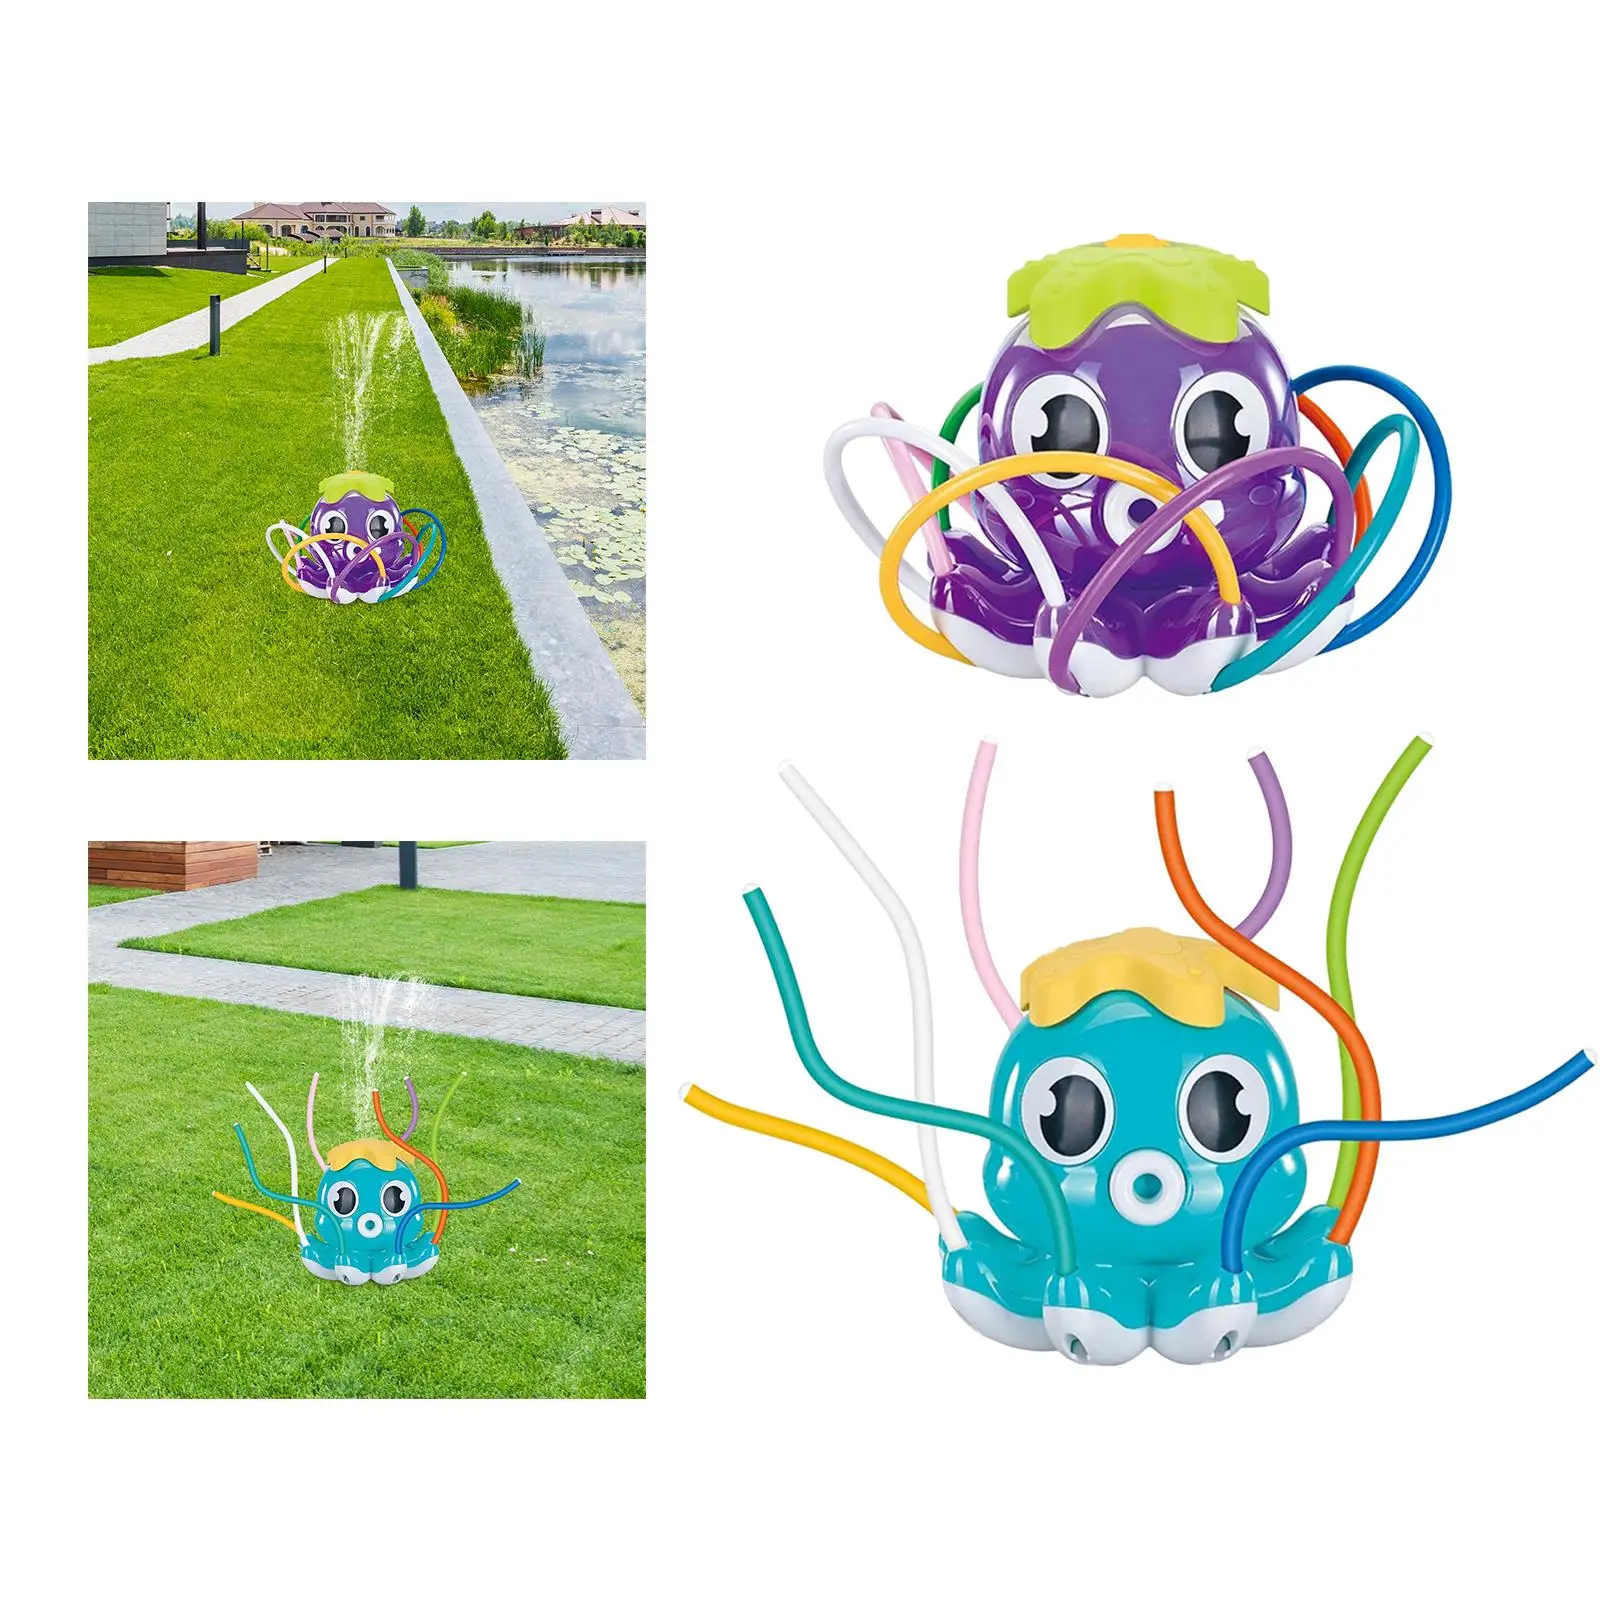 Octopus Sprinkler Toy with 8 Wiggle Tubes Outside Activities Summer Water Sprayer Toy for Pool Boys Girls Beach Parties